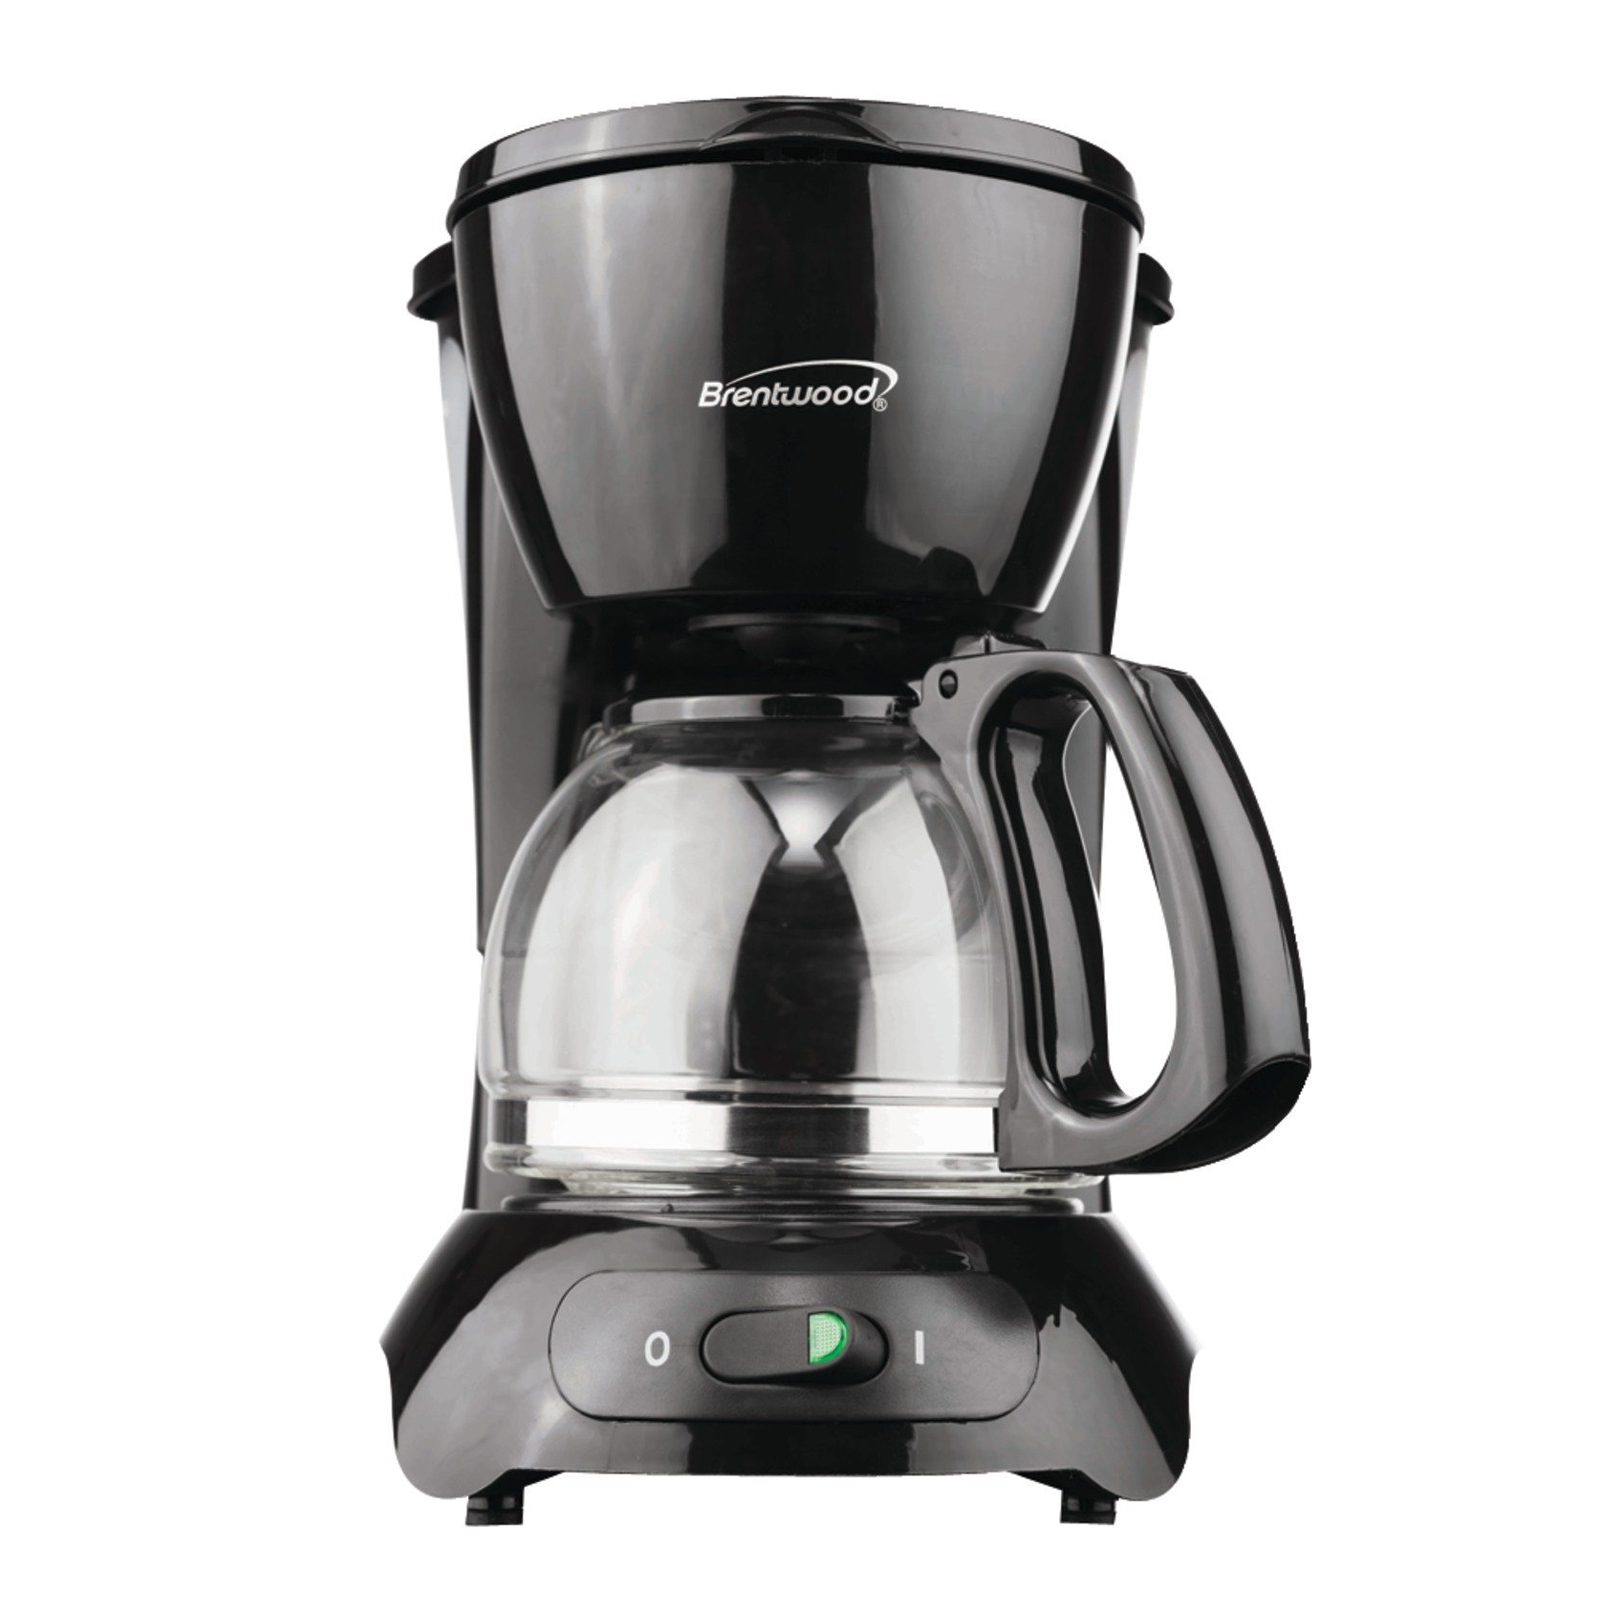 Brentwood 97094441M 4 Cup Coffee Maker - Black